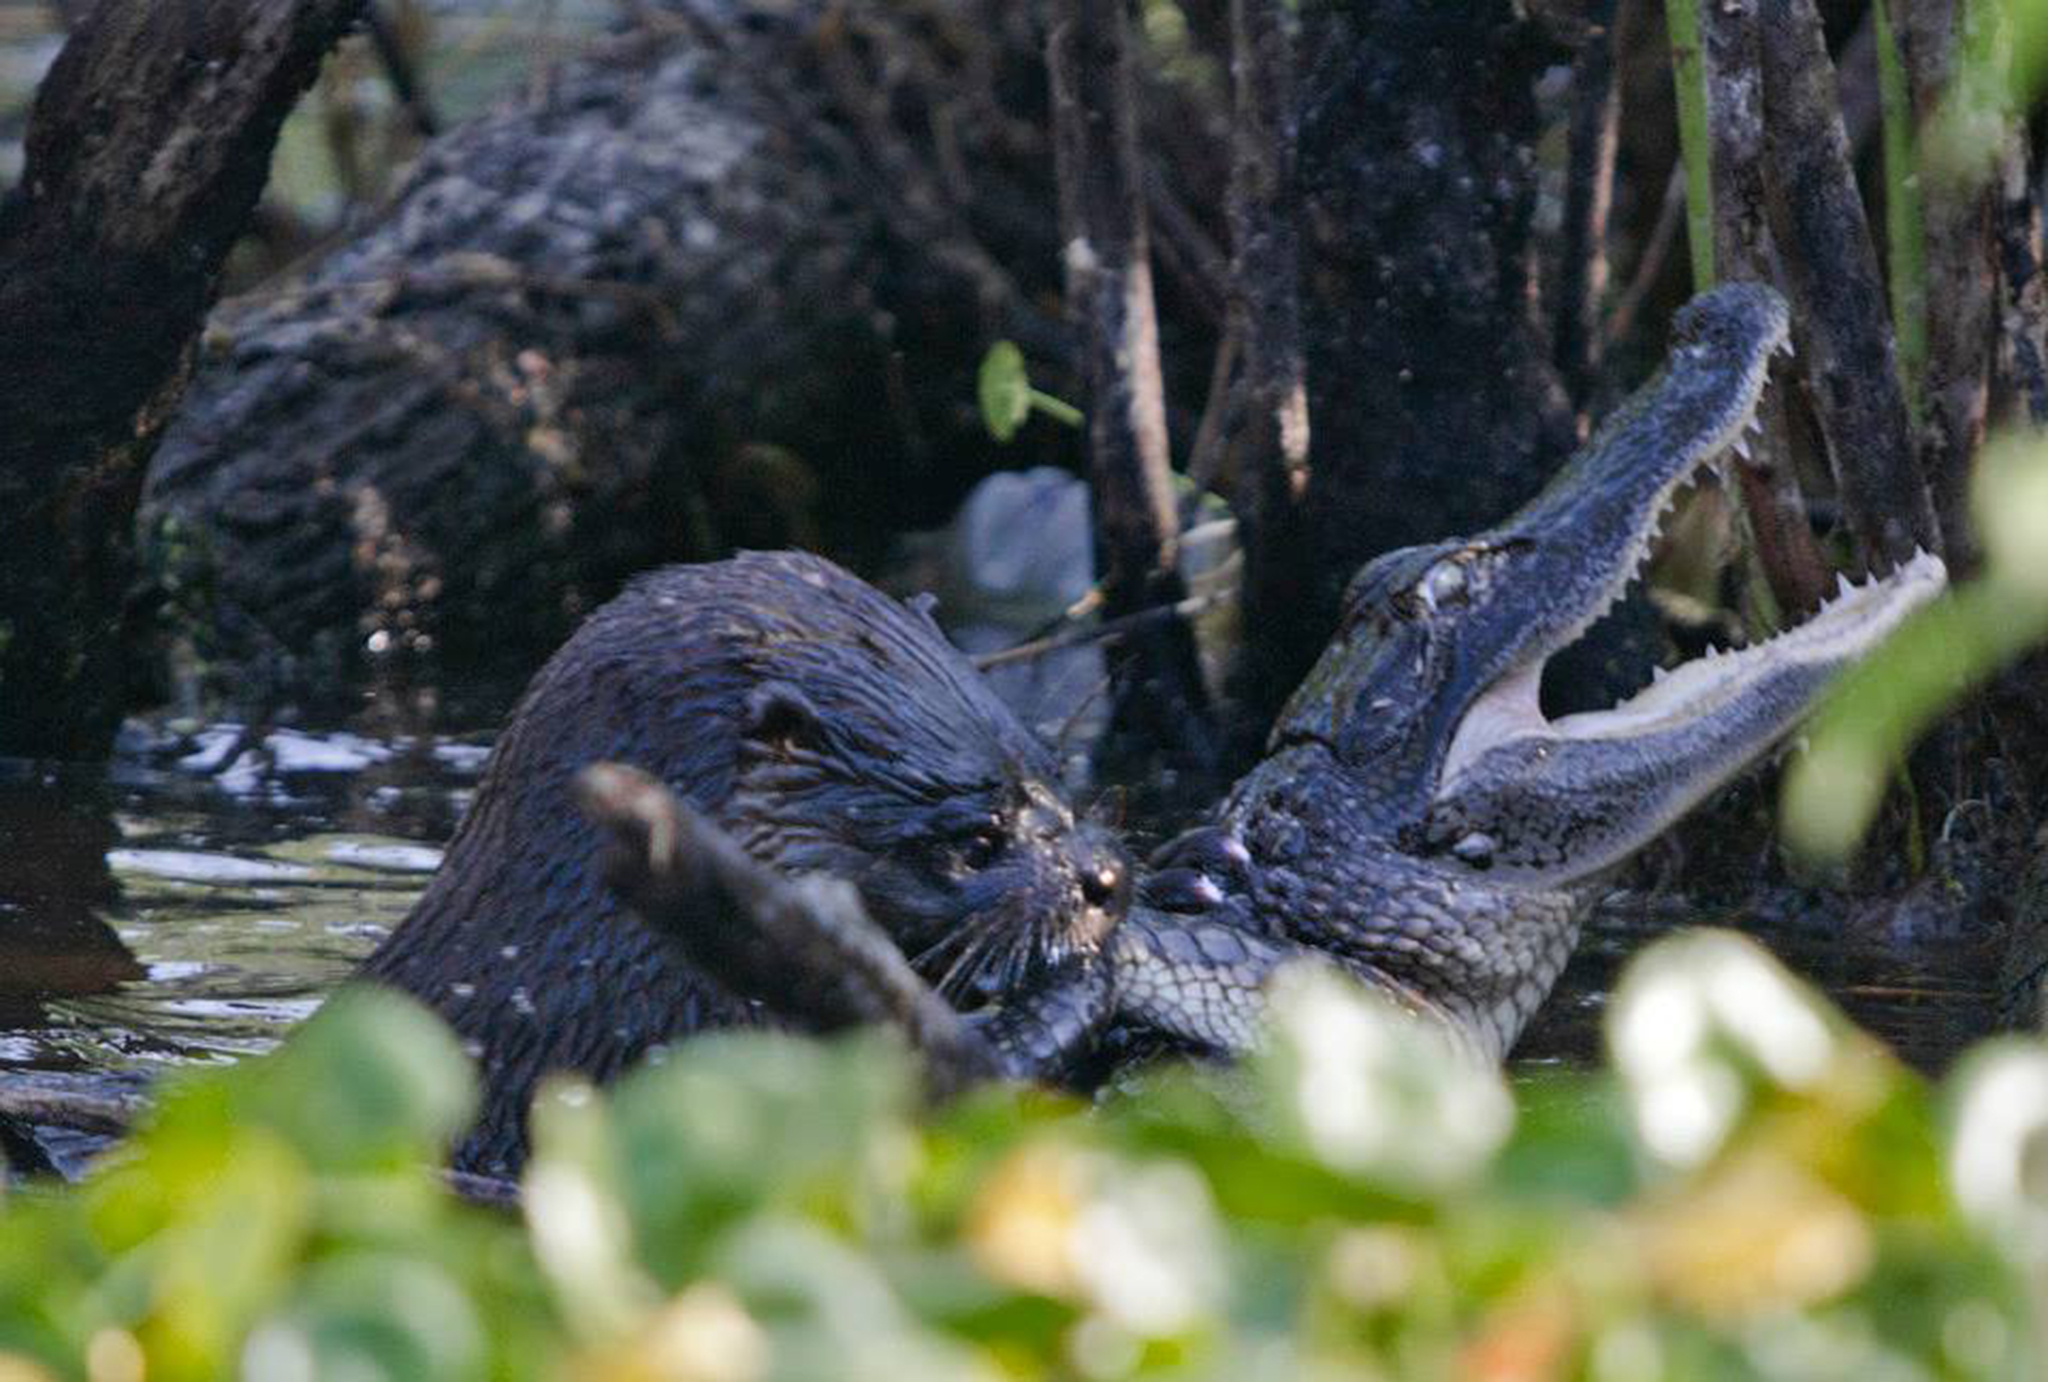 How a River Otter Can Bag an Alligator for Lunch